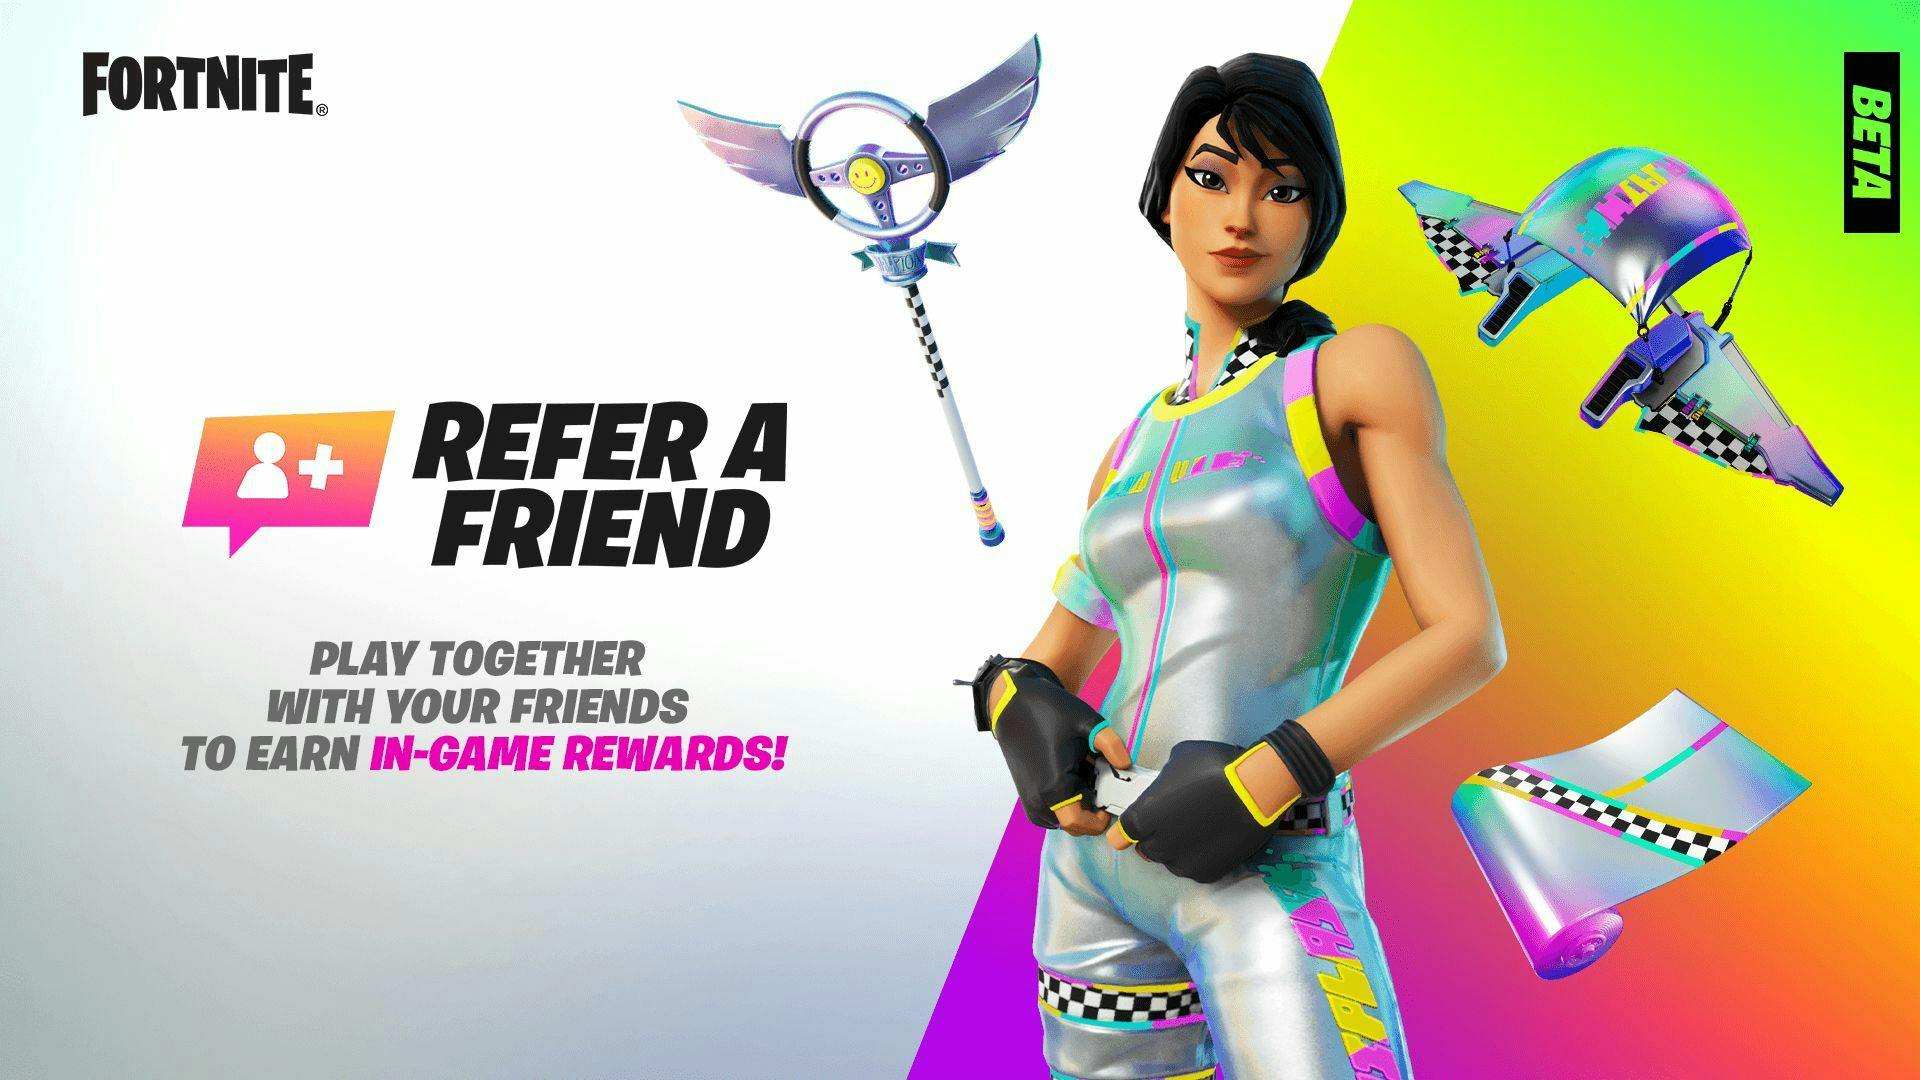 There are other ways to claim free skins in Fortnite, through challenges or Refer-A-Friend programs. 